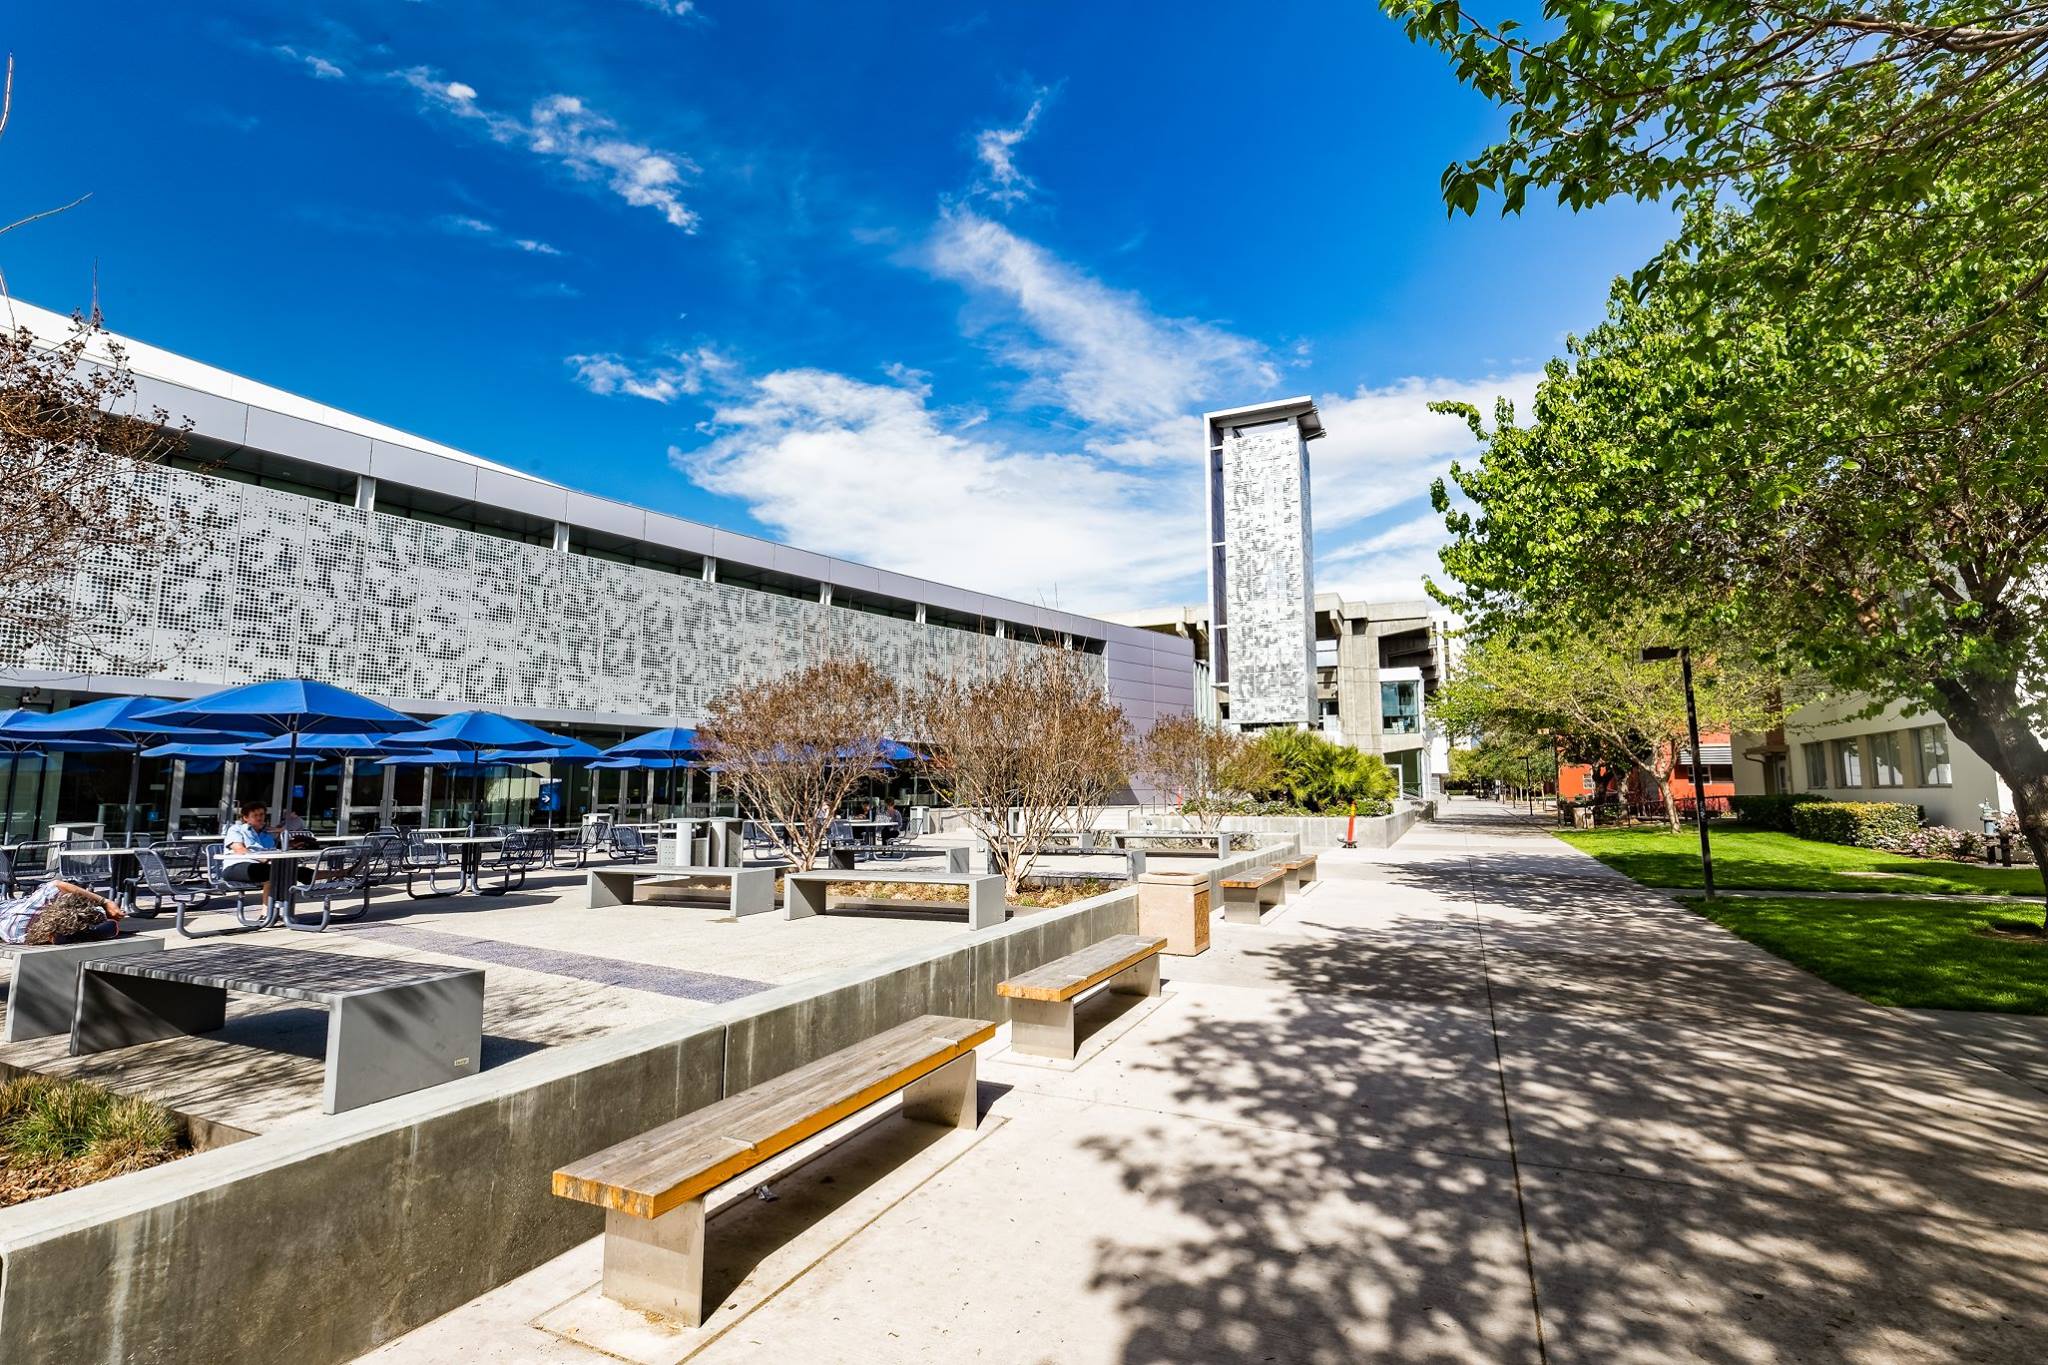 Student Union Outdoor Seating Area